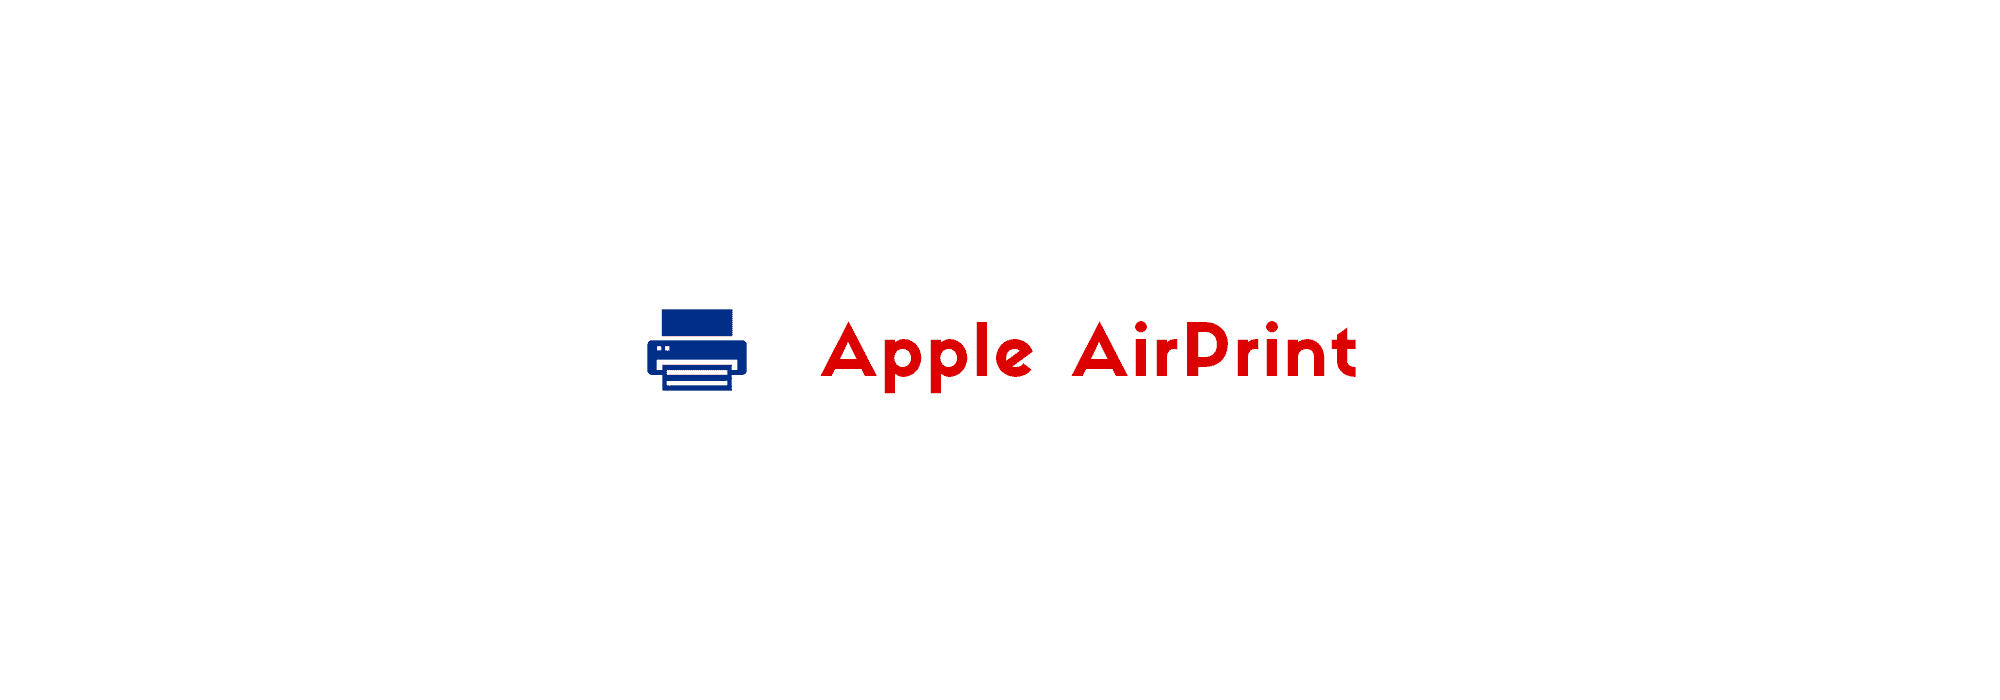 AirPrint is an Apple technology that helps you create full-quality printed output without the need to download or install drivers.